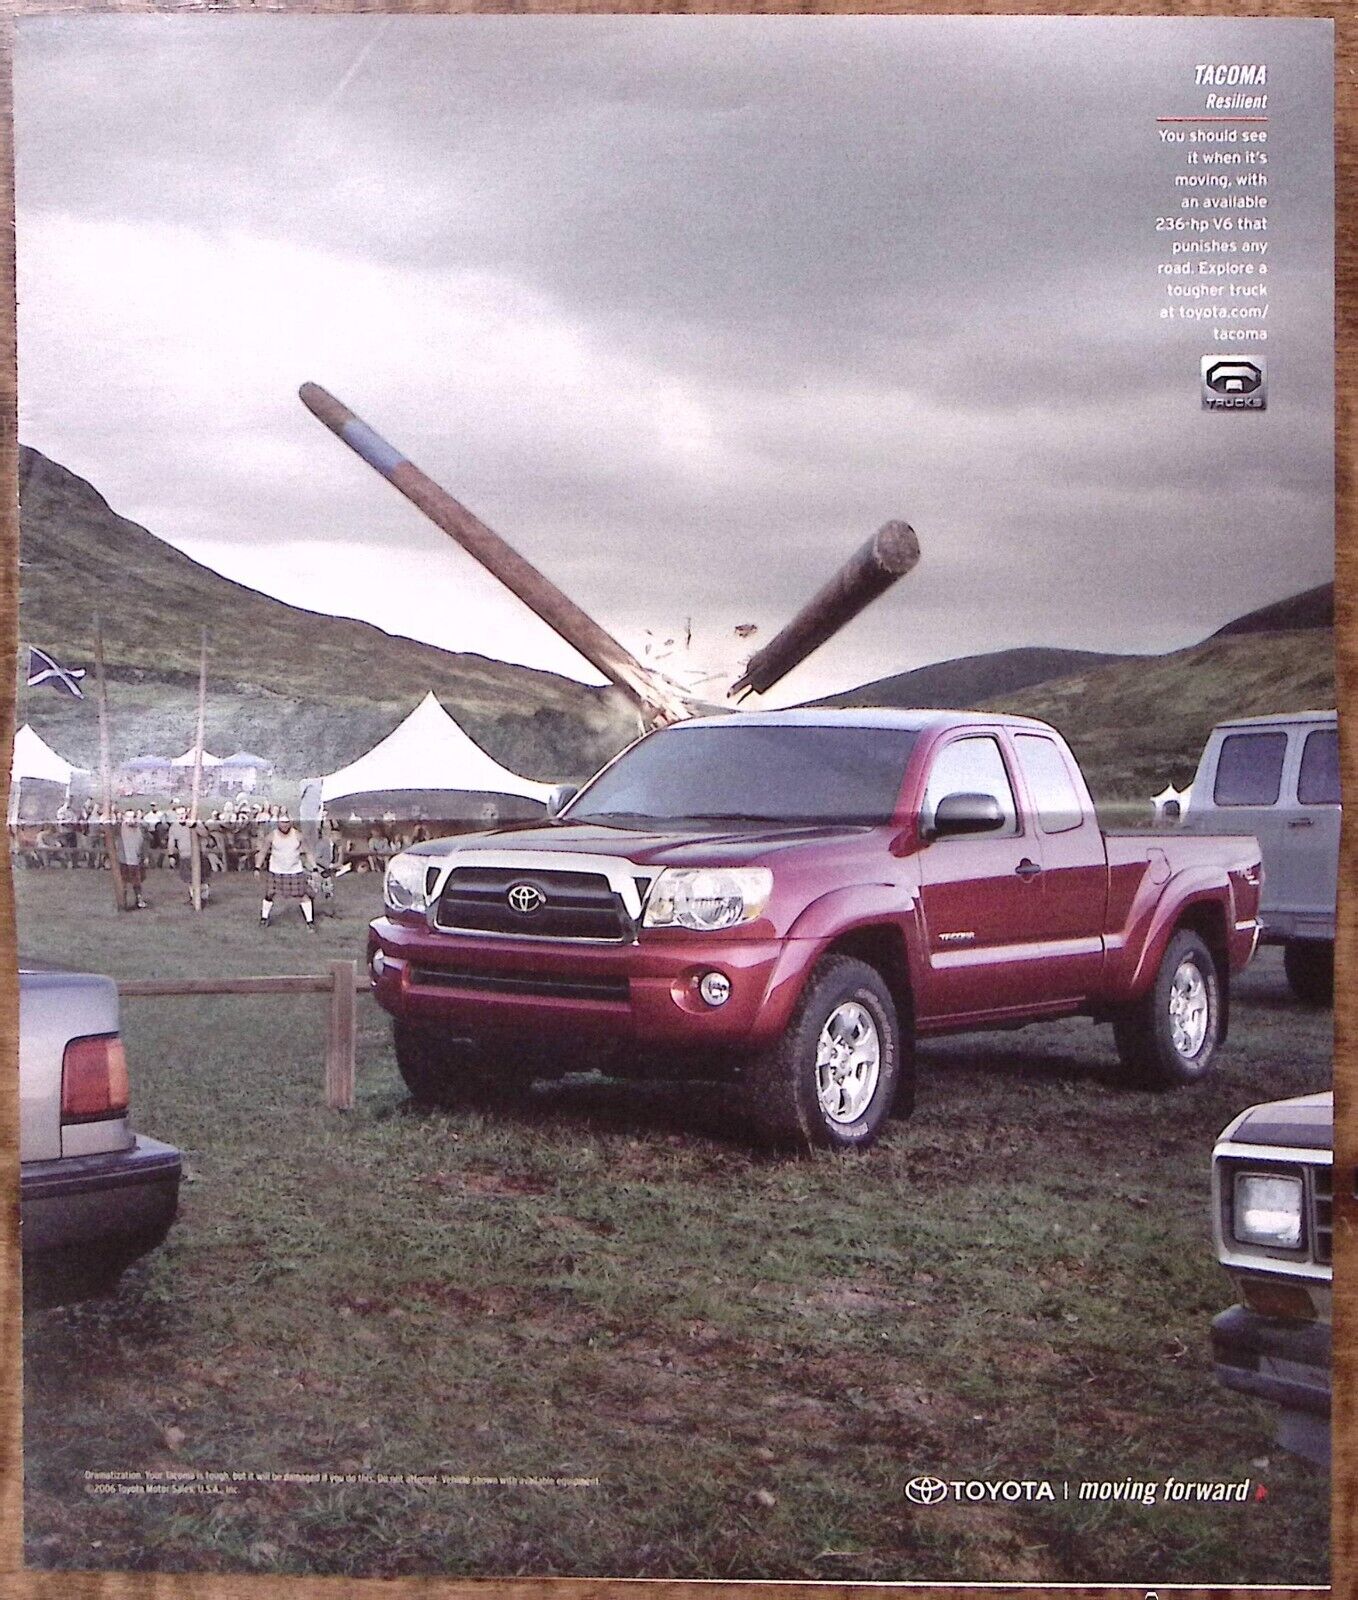 2006 TOYOTA TACOMA RESILIENT MOVING FORWARD LARGE PRINT ADVERTISEMENT Z4767